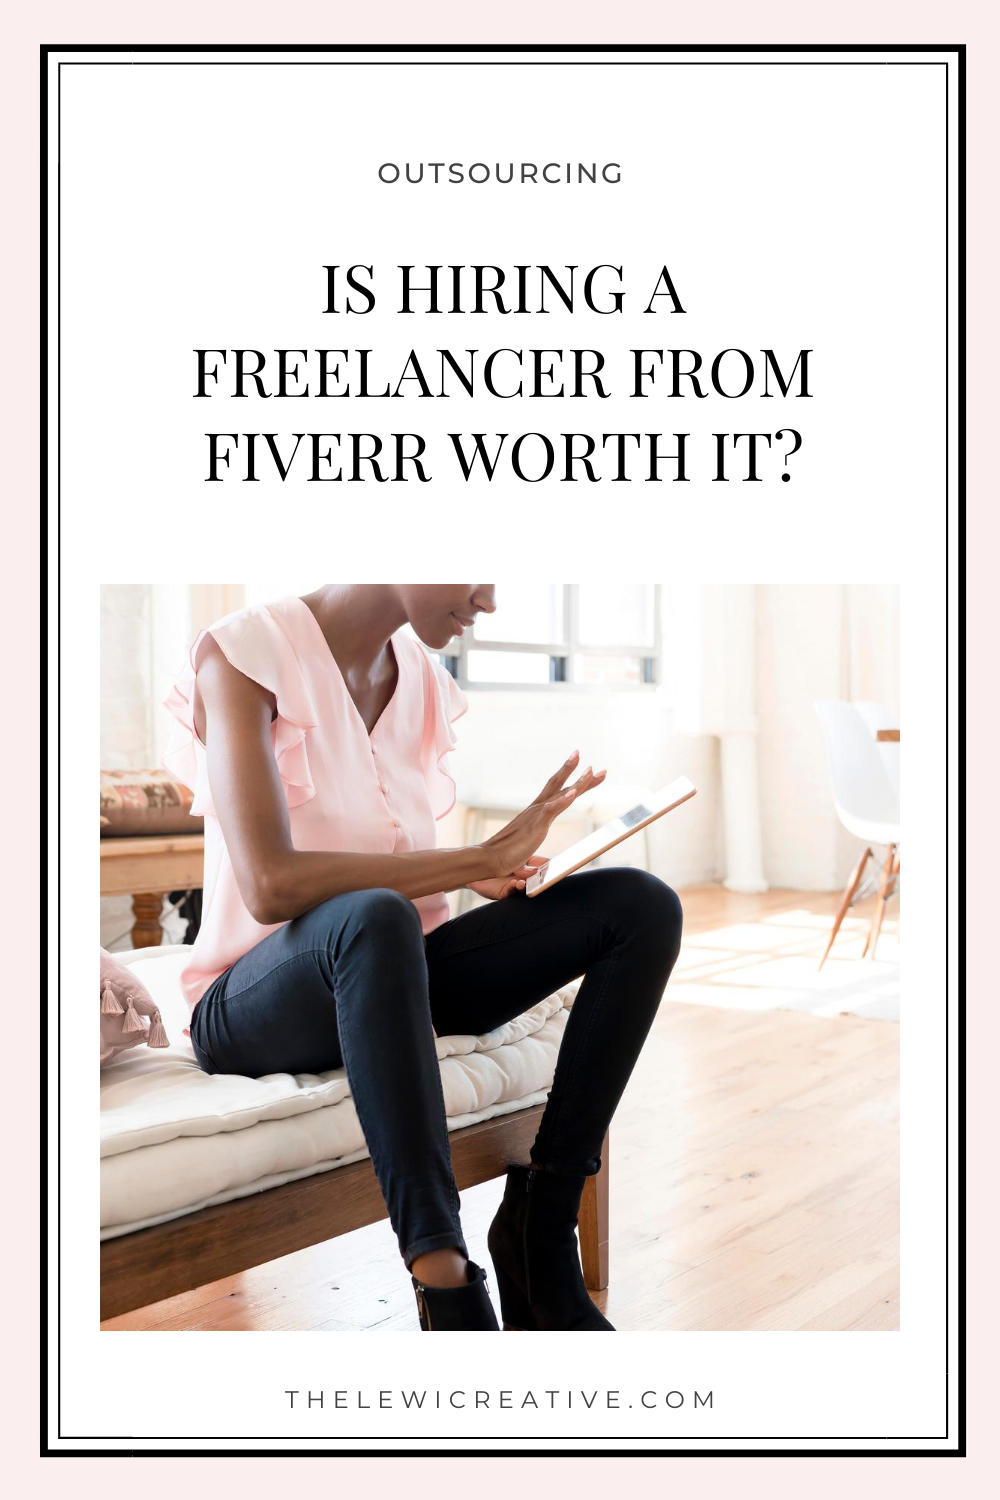 Fiverr Review: I Hired a Freelancer From Fiverr and Here’s What Happened